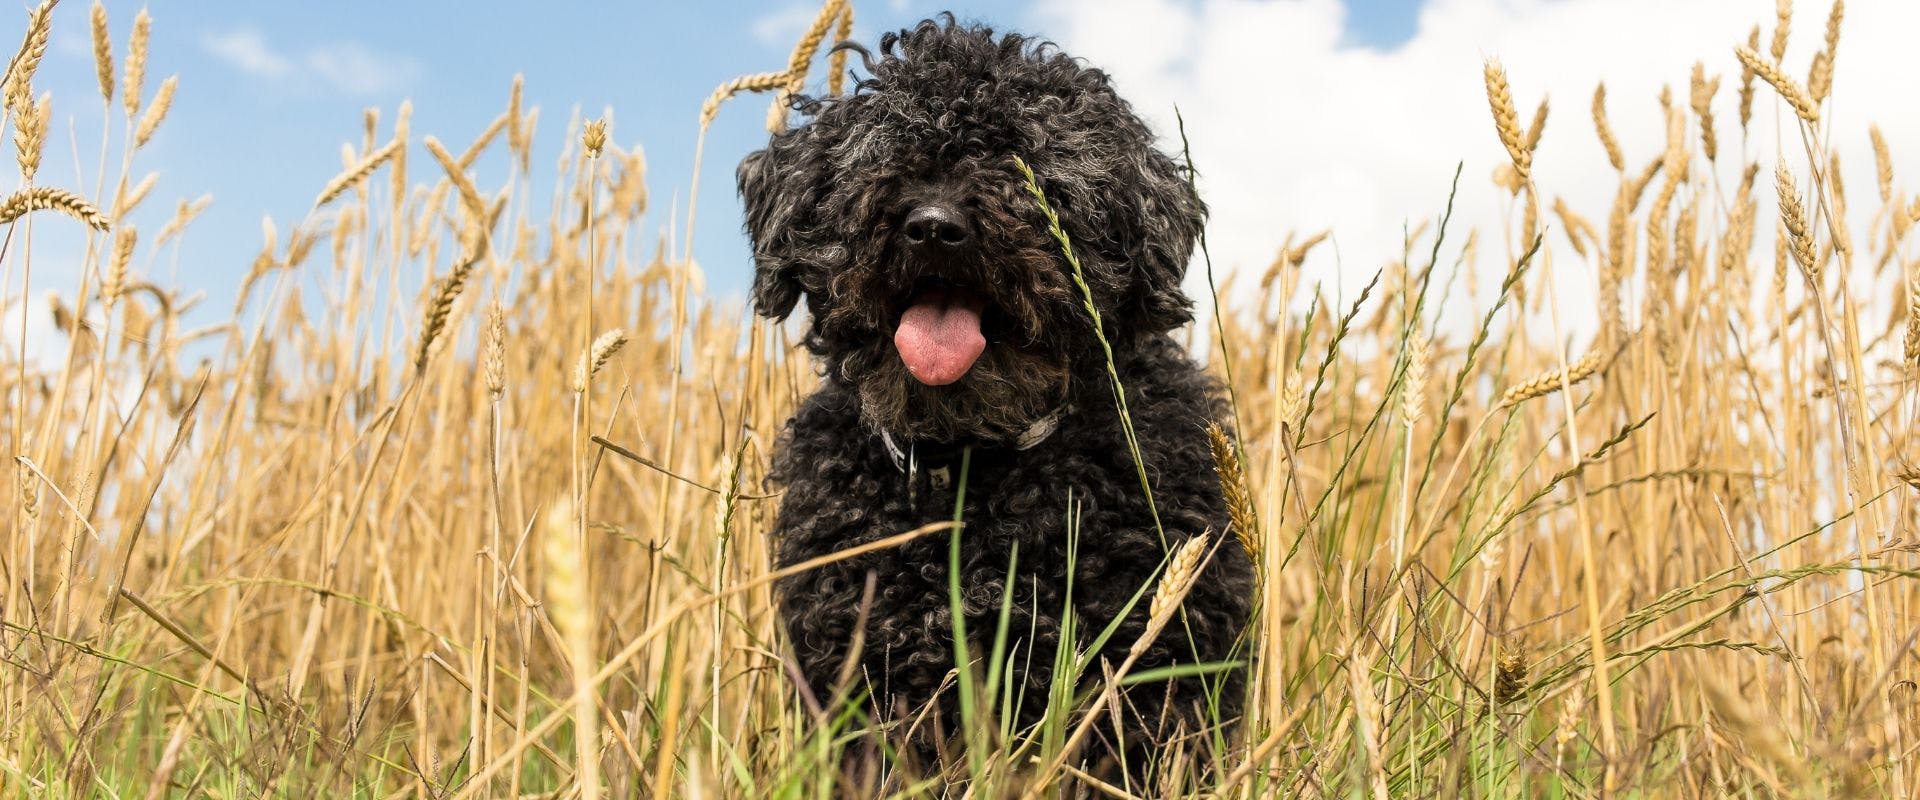 Curly-haired black dog in a wheat field